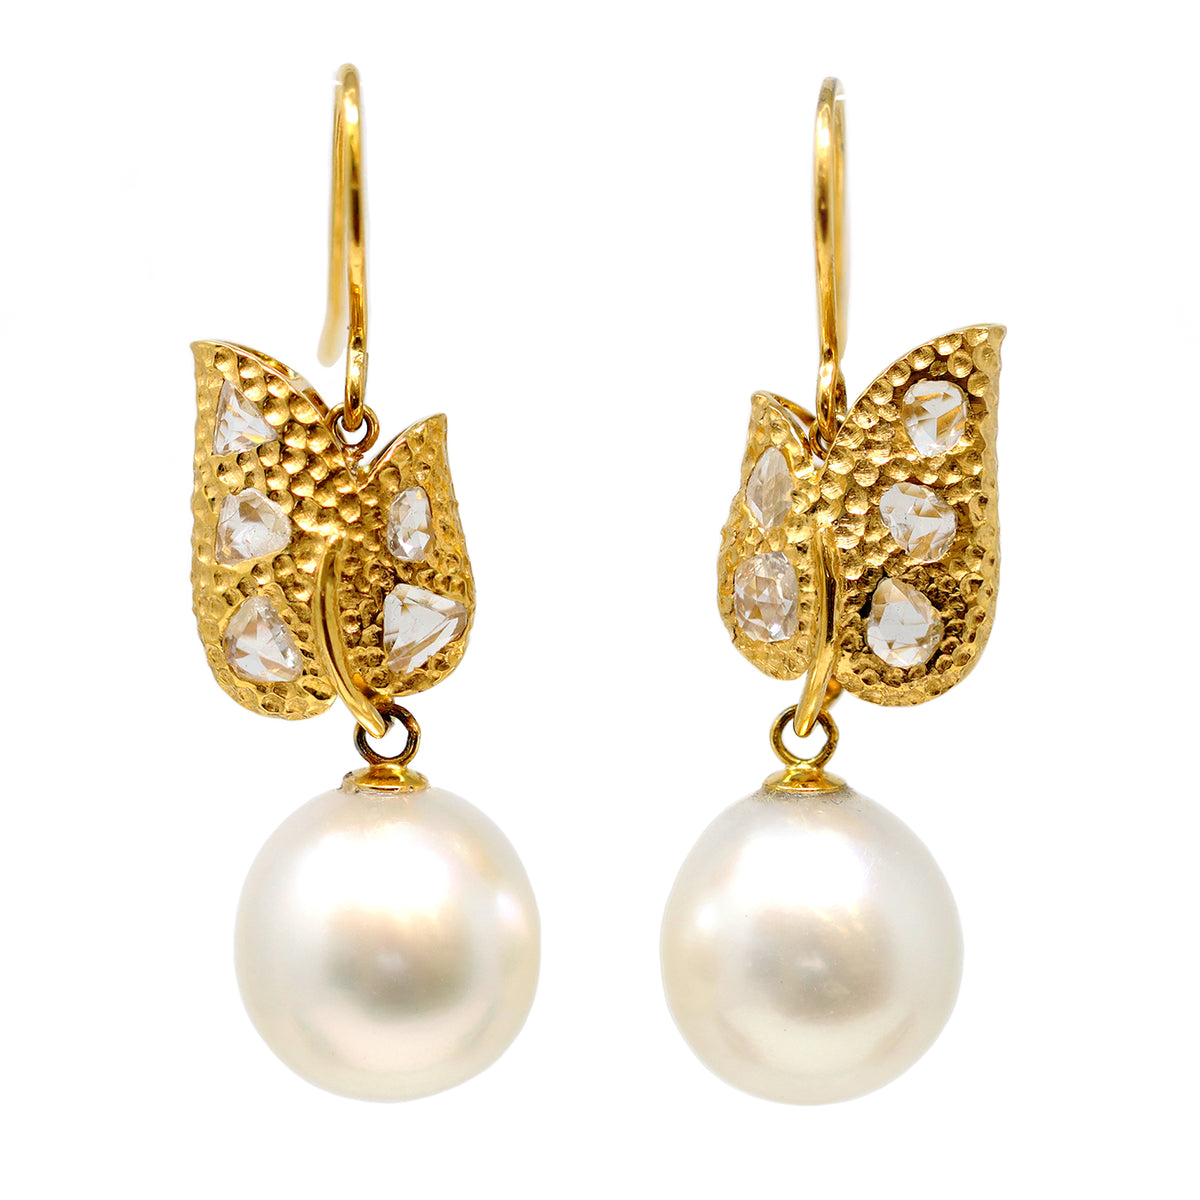  South Sea Pearl and Rose Cut Diamond Earrings in 18 Karat Yellow Gold front view